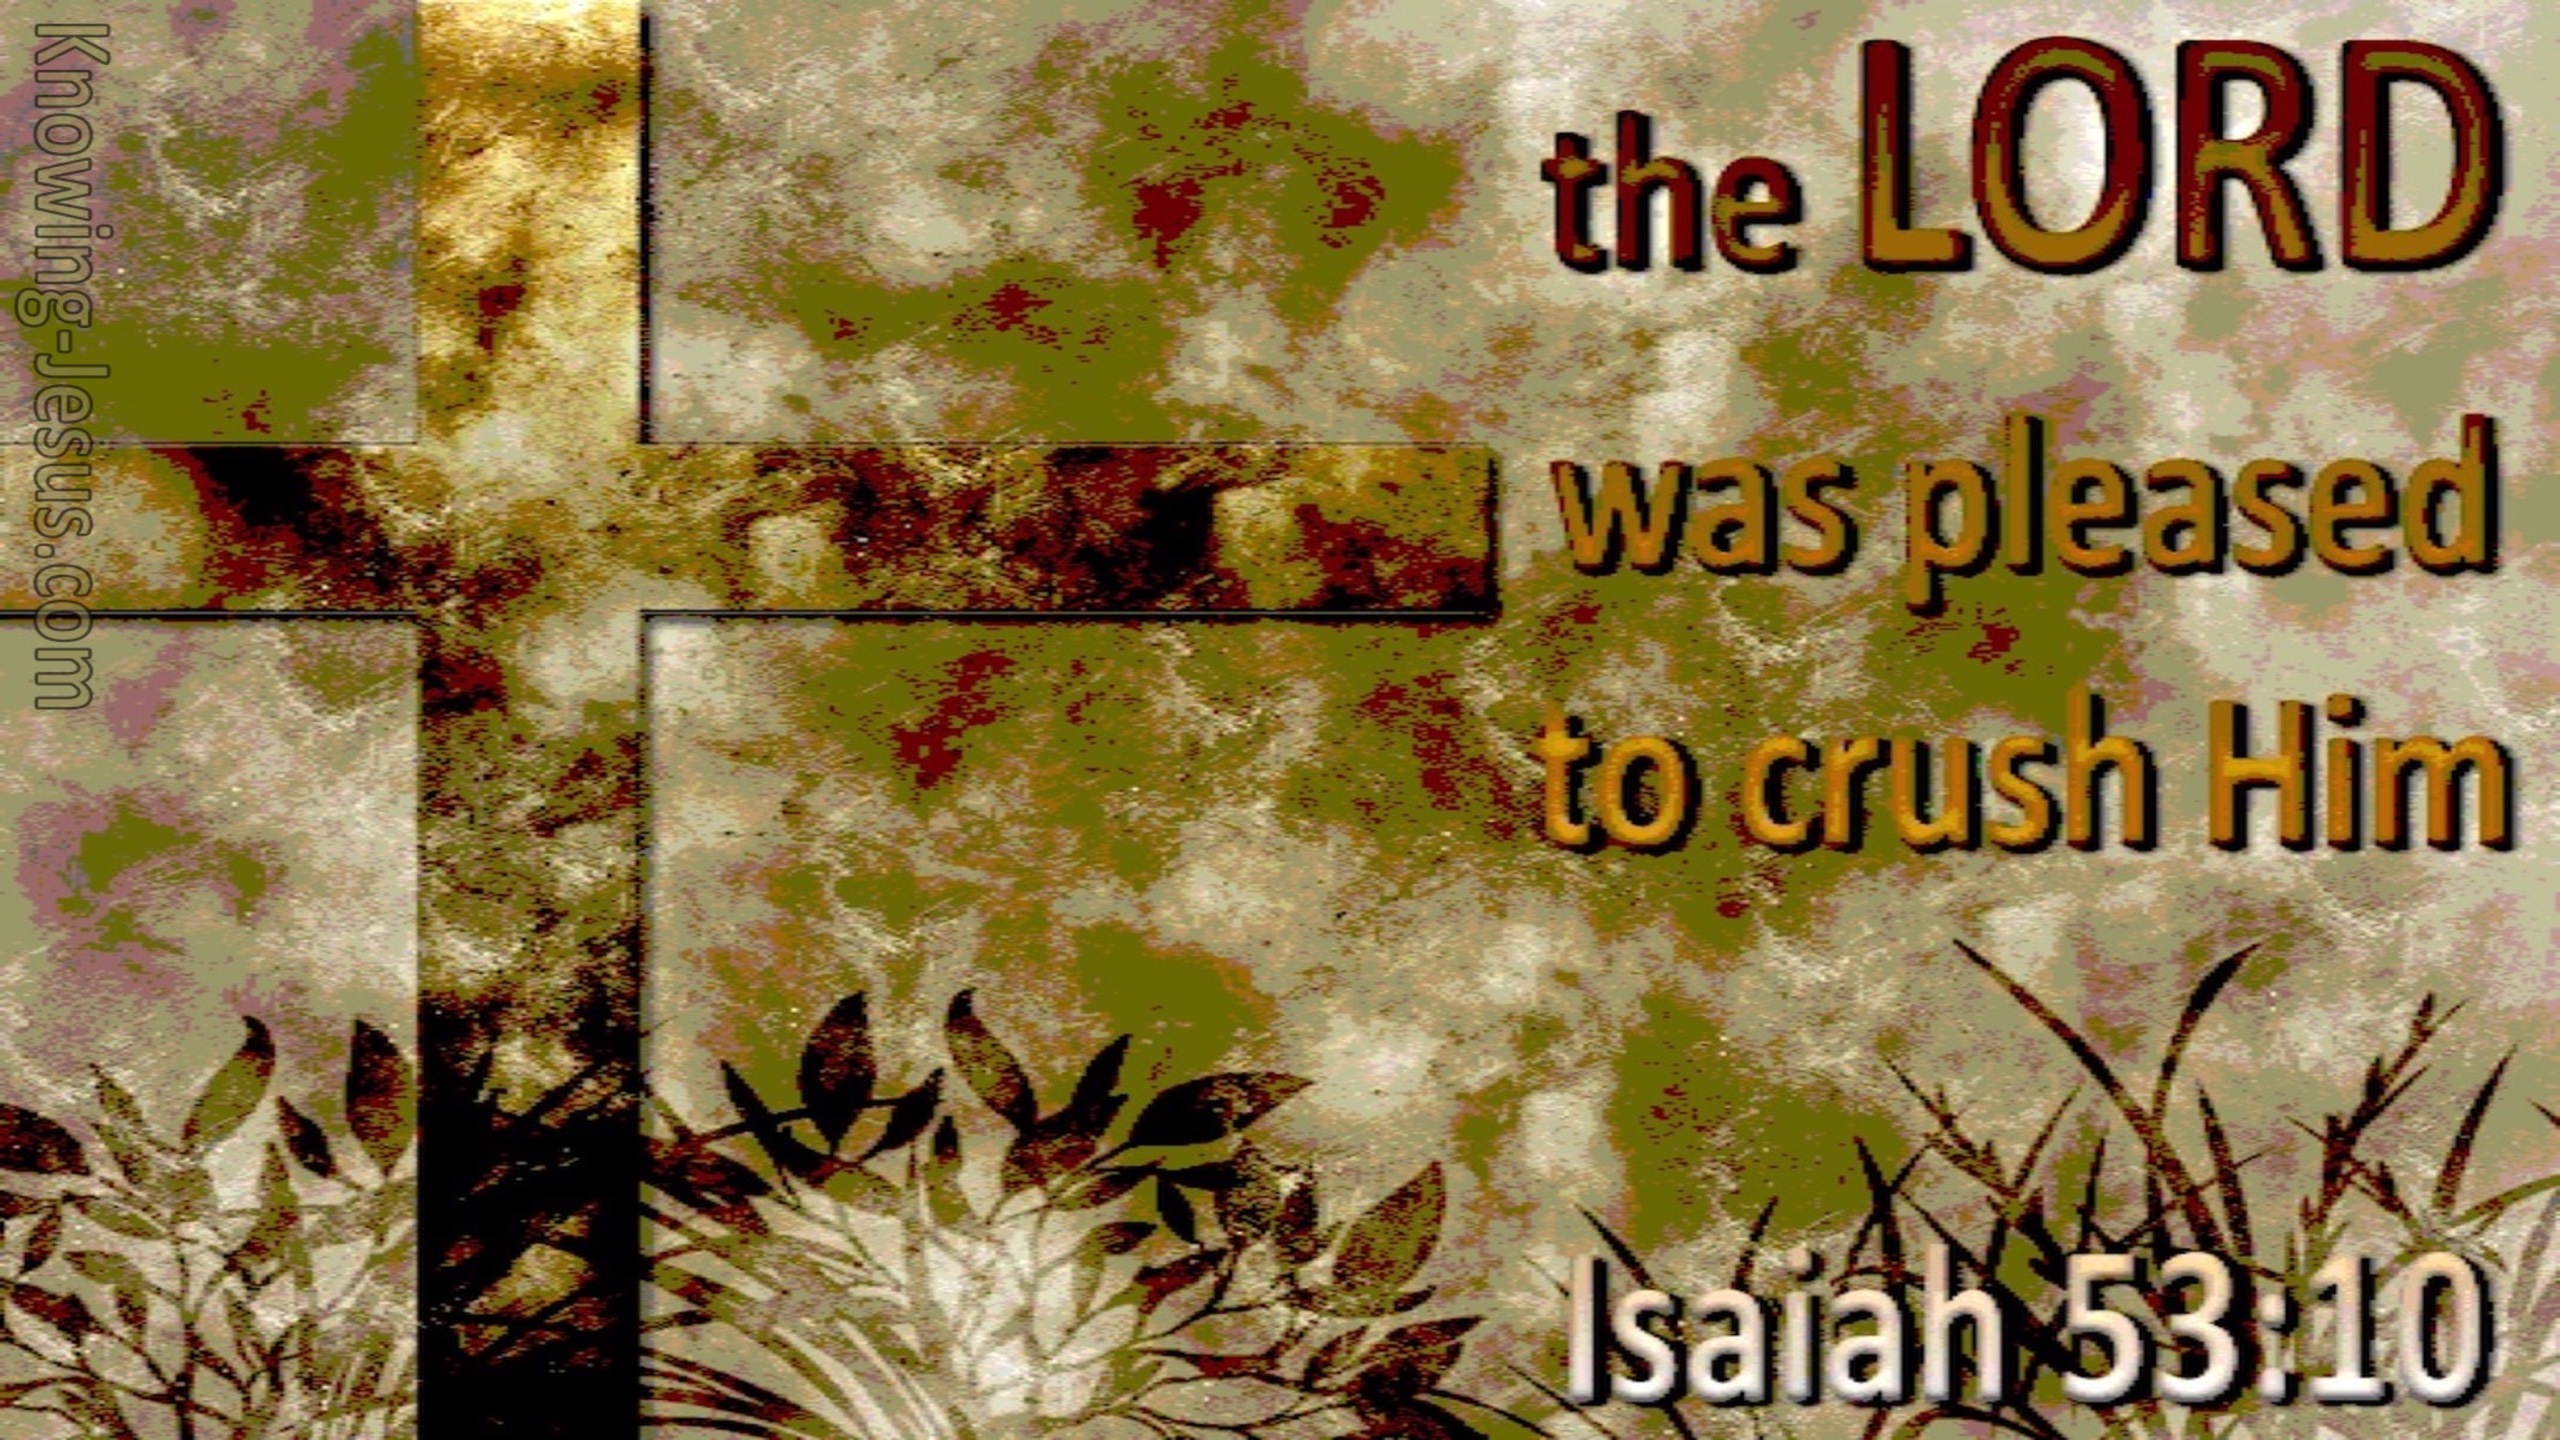 Isaiah 53:10 The Lord Crushed Him (sage)